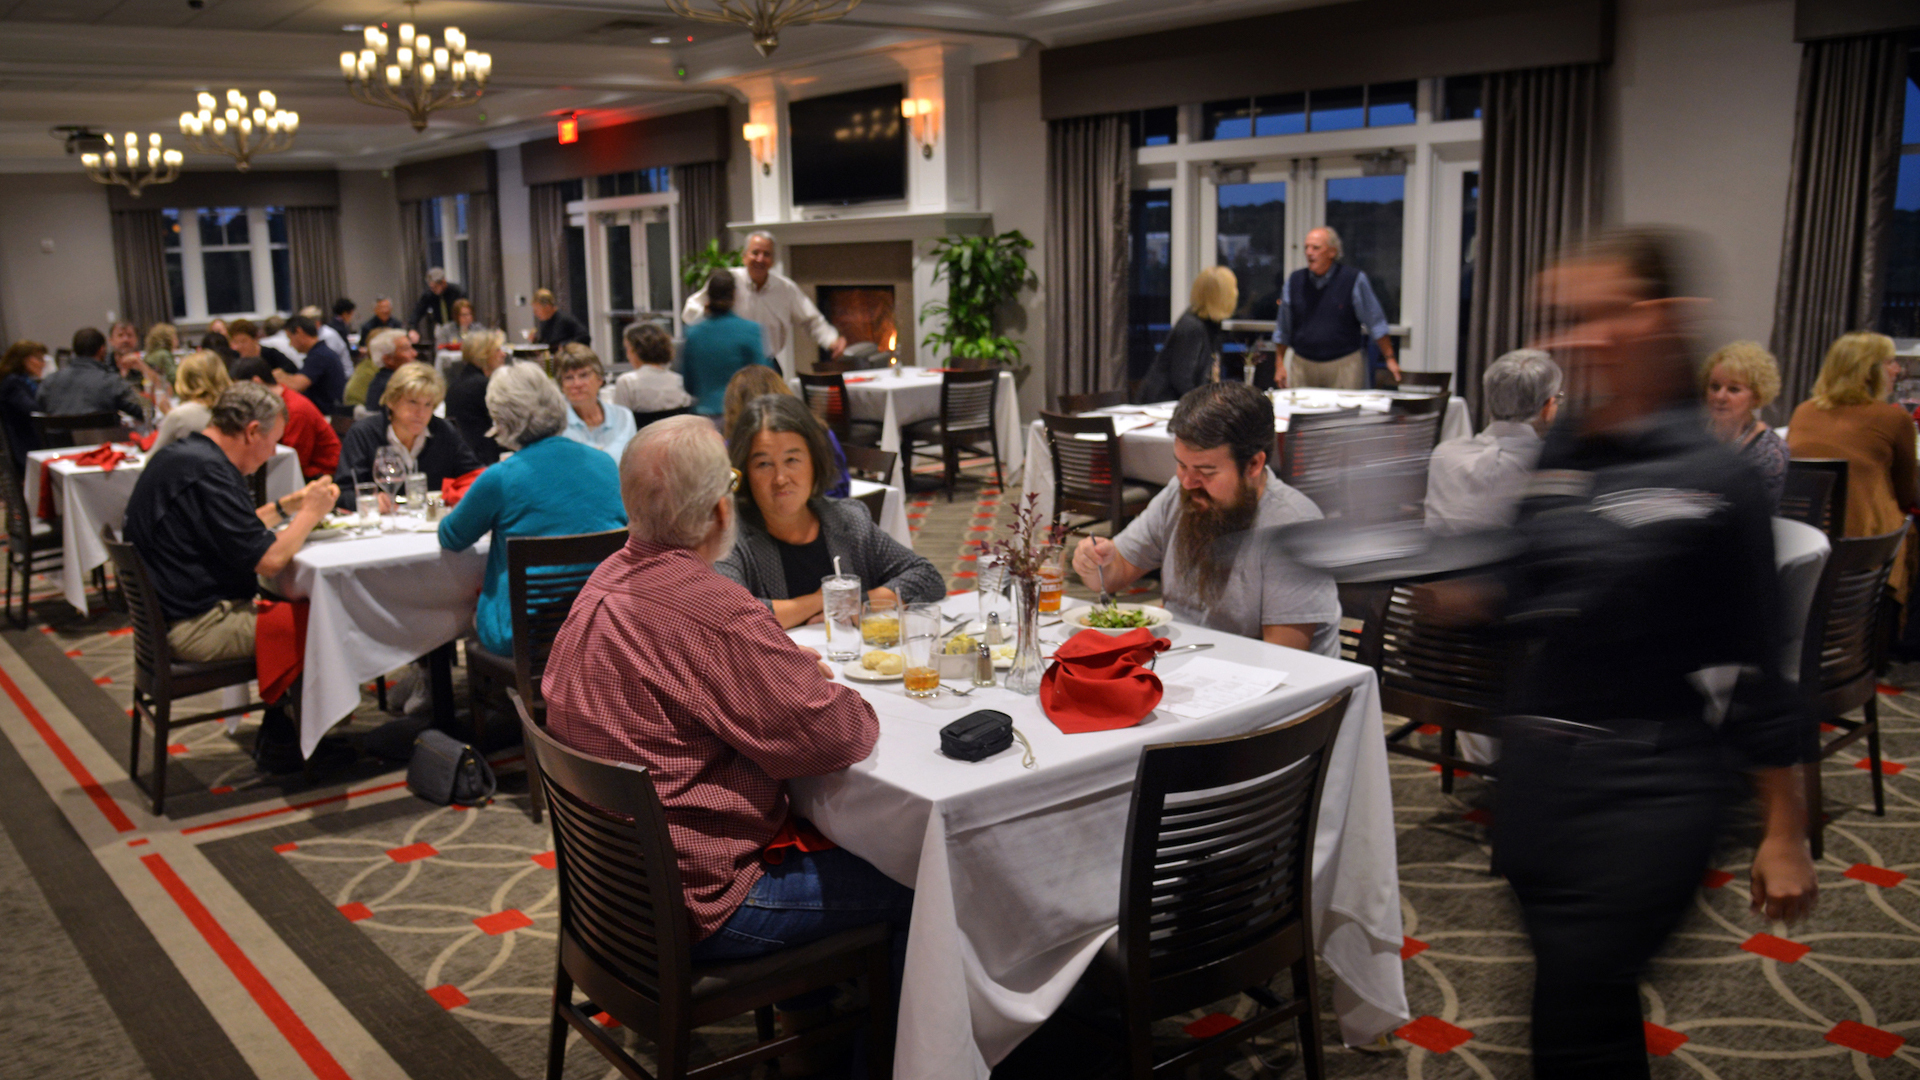 Groups of working professionals dine during a lively evening at the Terrace Dining Room.